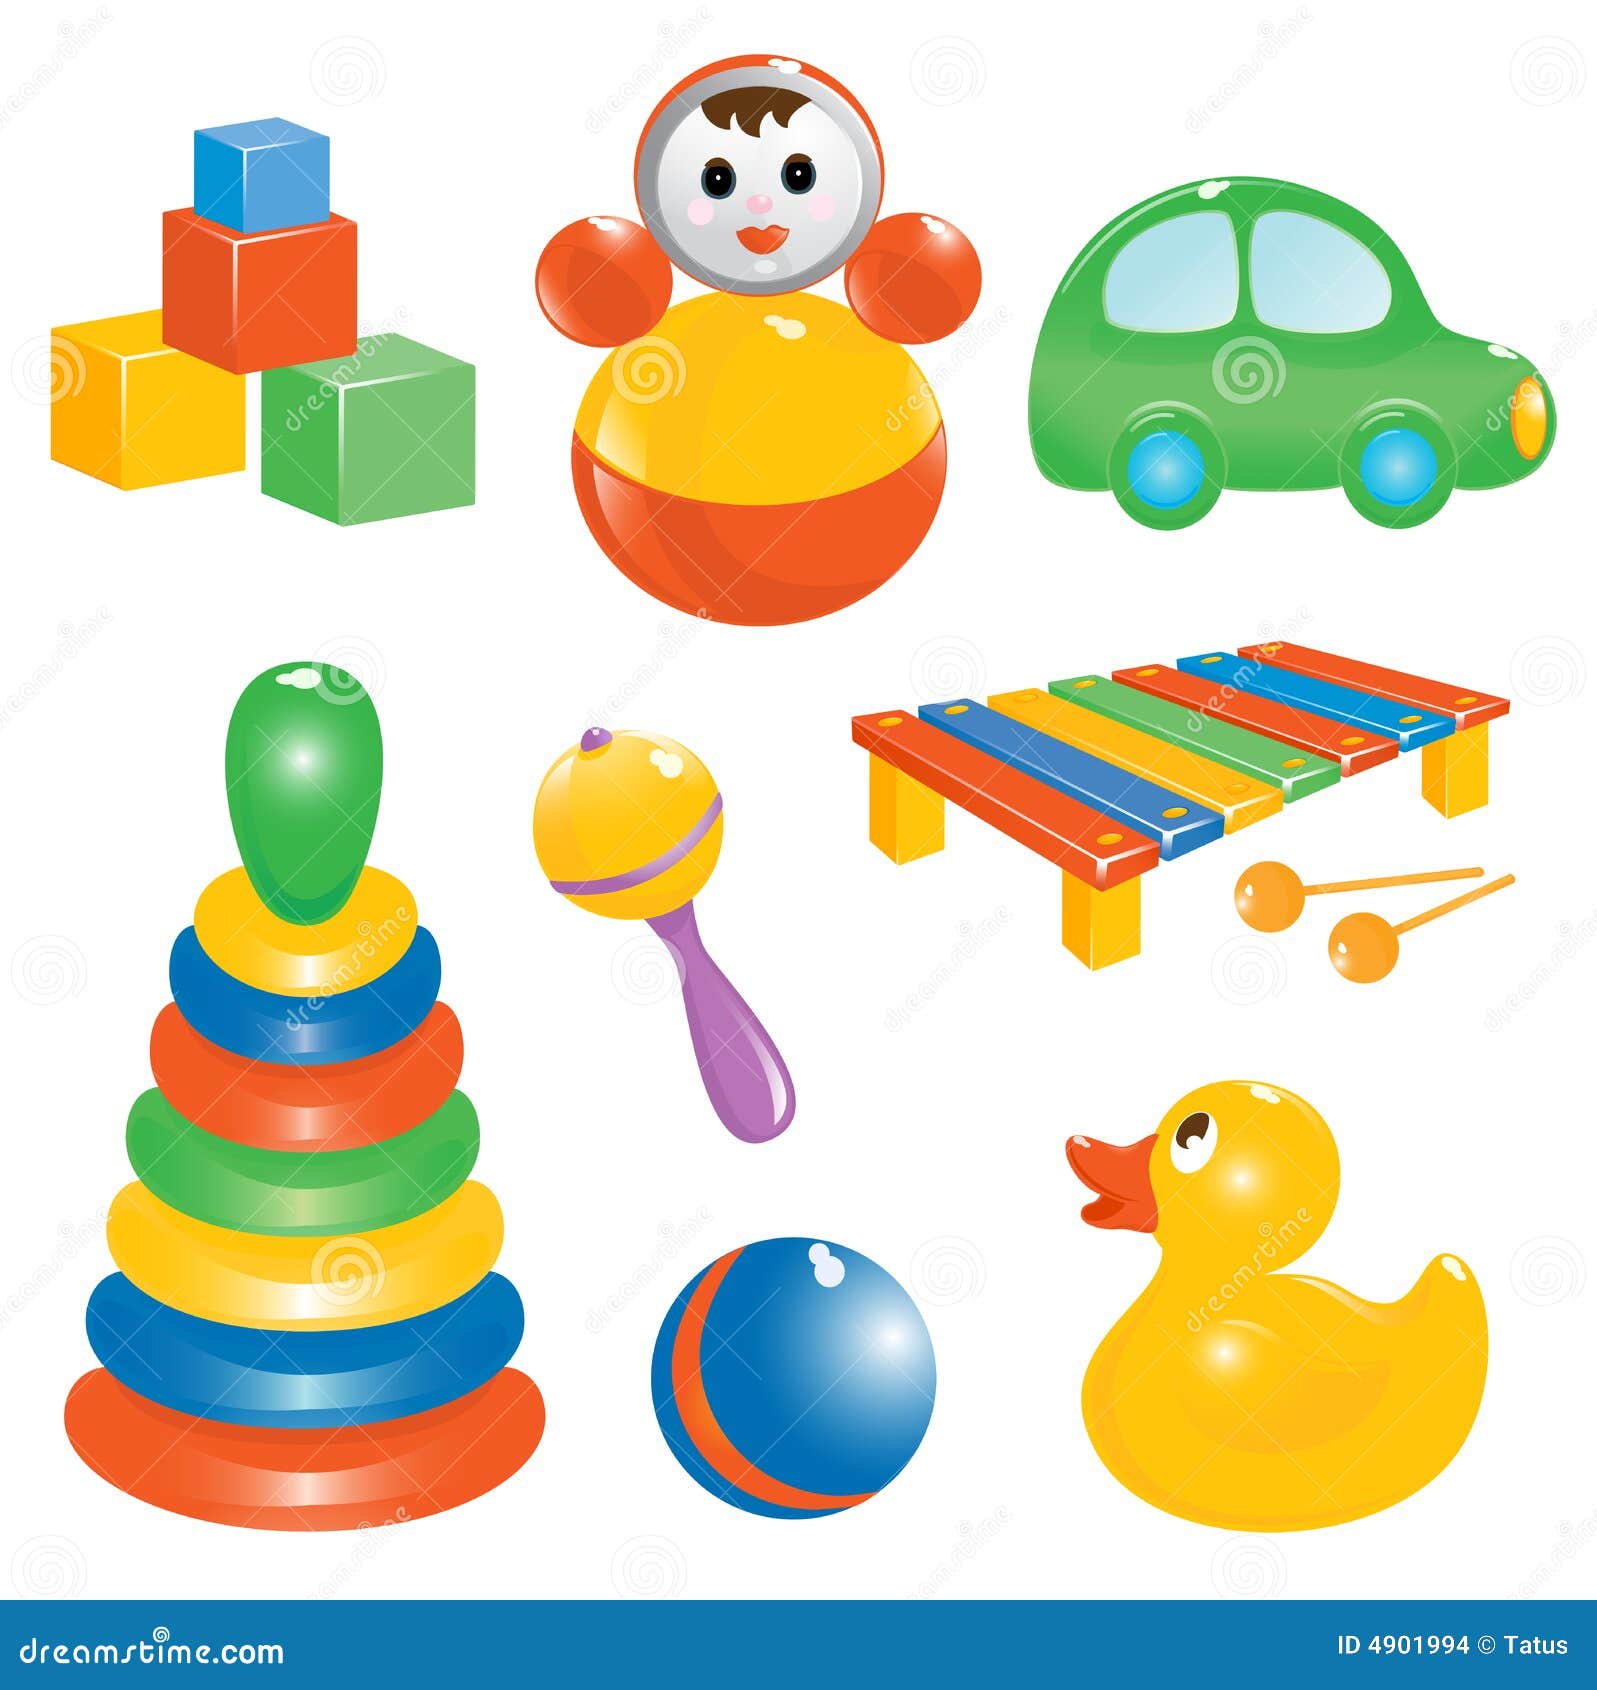 clean up toys clipart free - photo #35